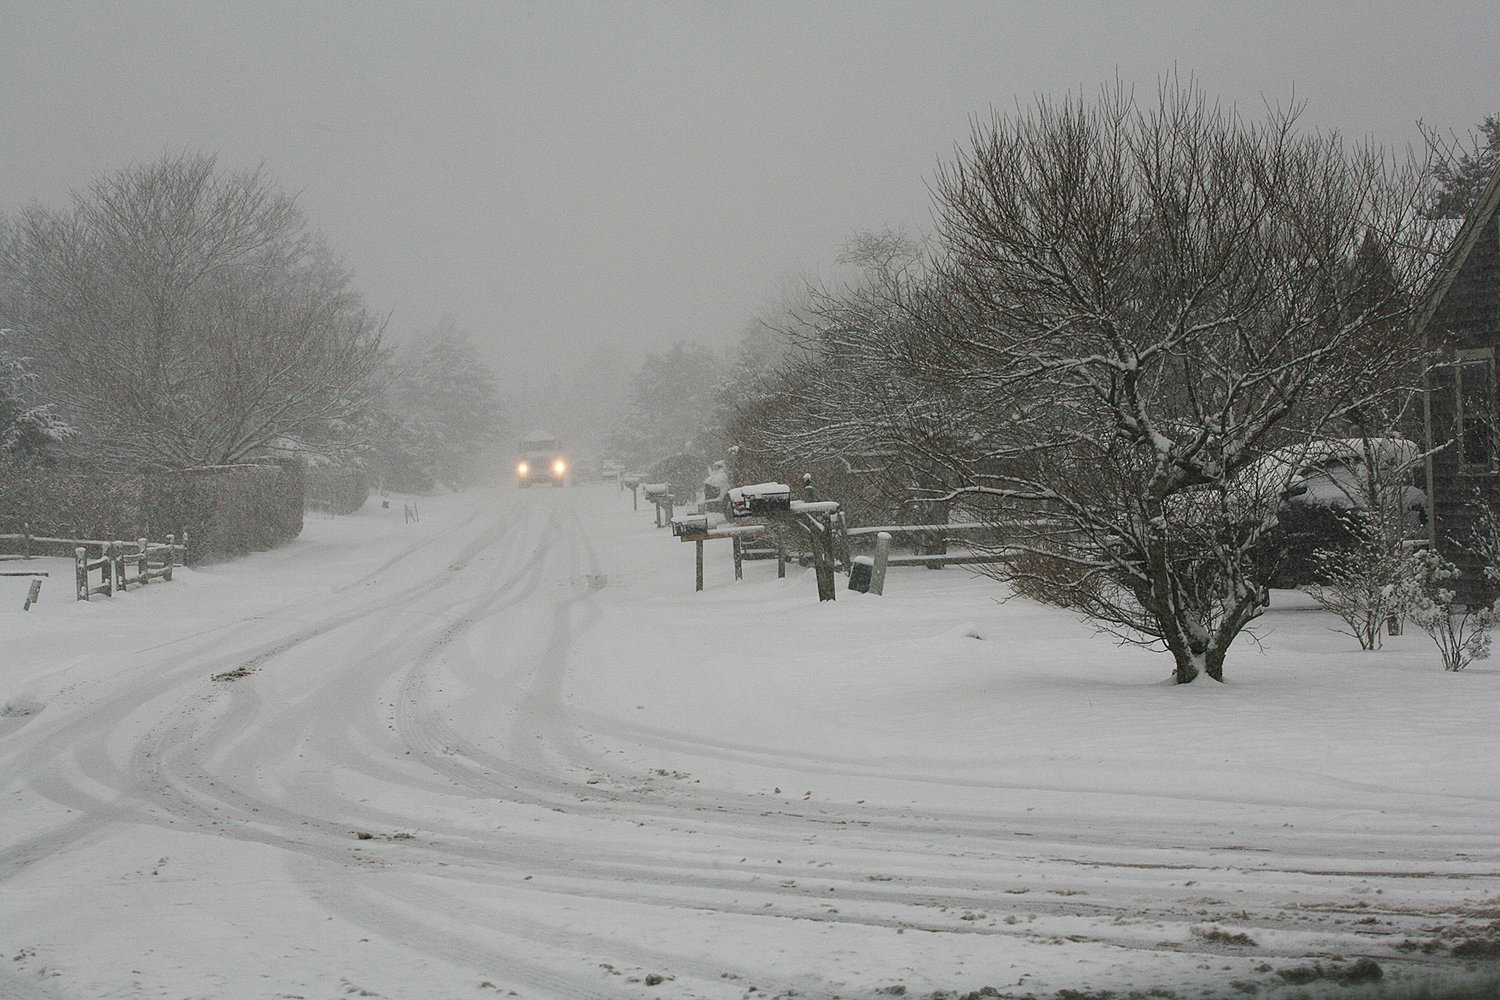 Snow blankets a road off Surfside Road near the schools.